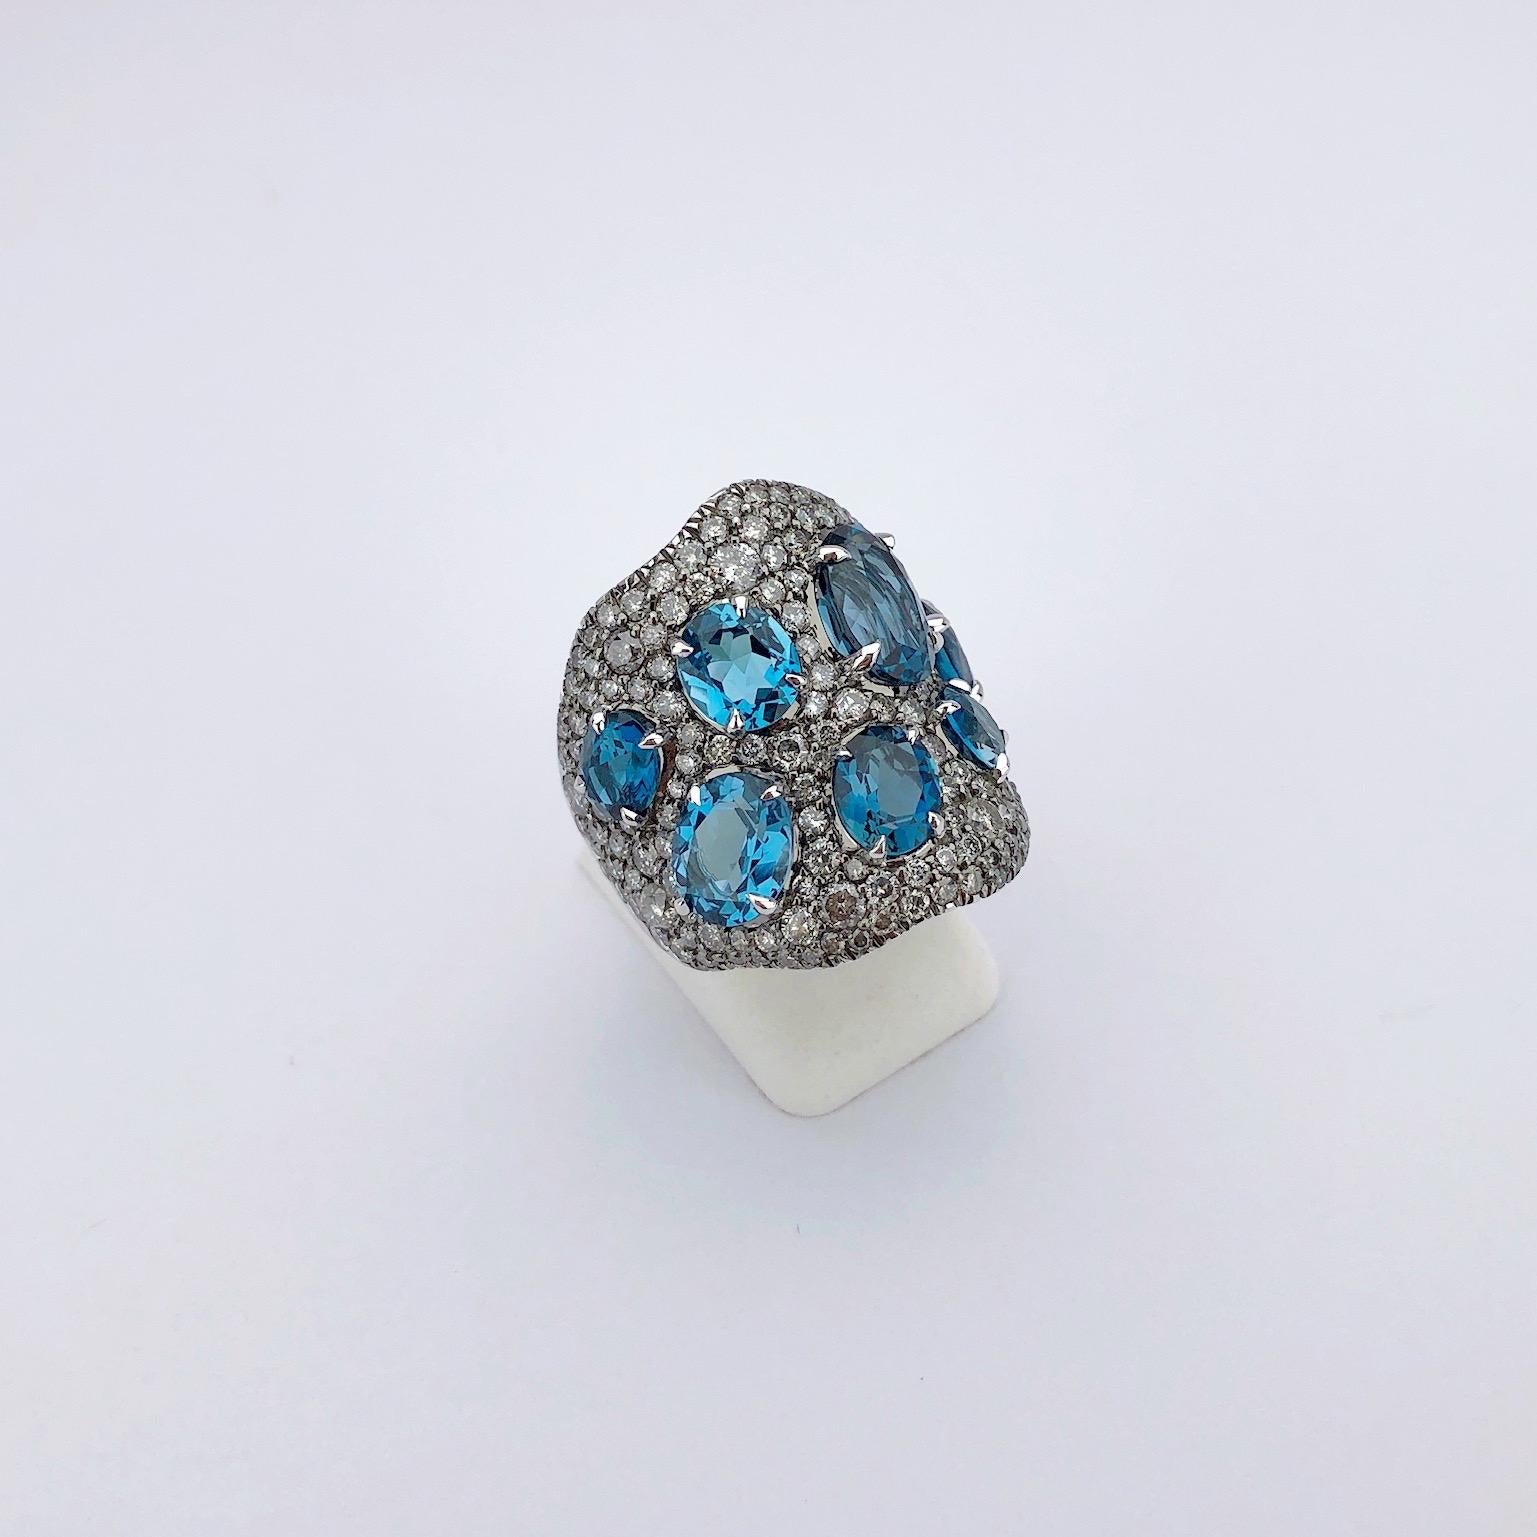 This 18 karat white gold wide wave ring is pave set with silver grey round brilliant diamonds. Oval blue topaz stones are set with the diamonds for a beautiful contrast. The ring measures approximately 1